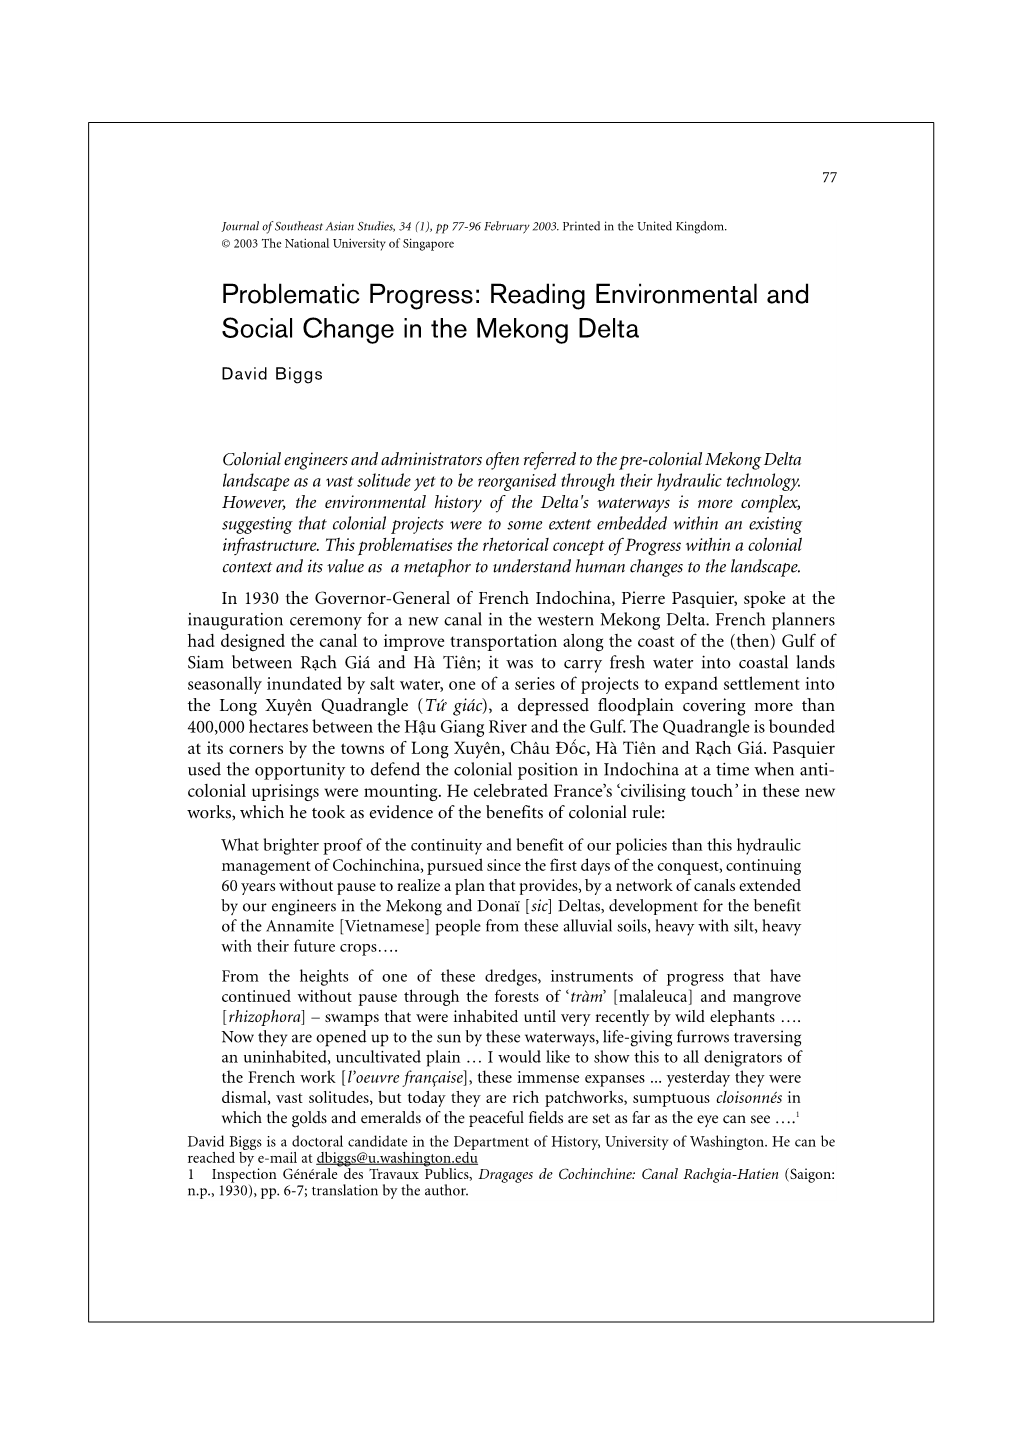 Problematic Progress: Reading Environmental and Social Change in the Mekong Delta